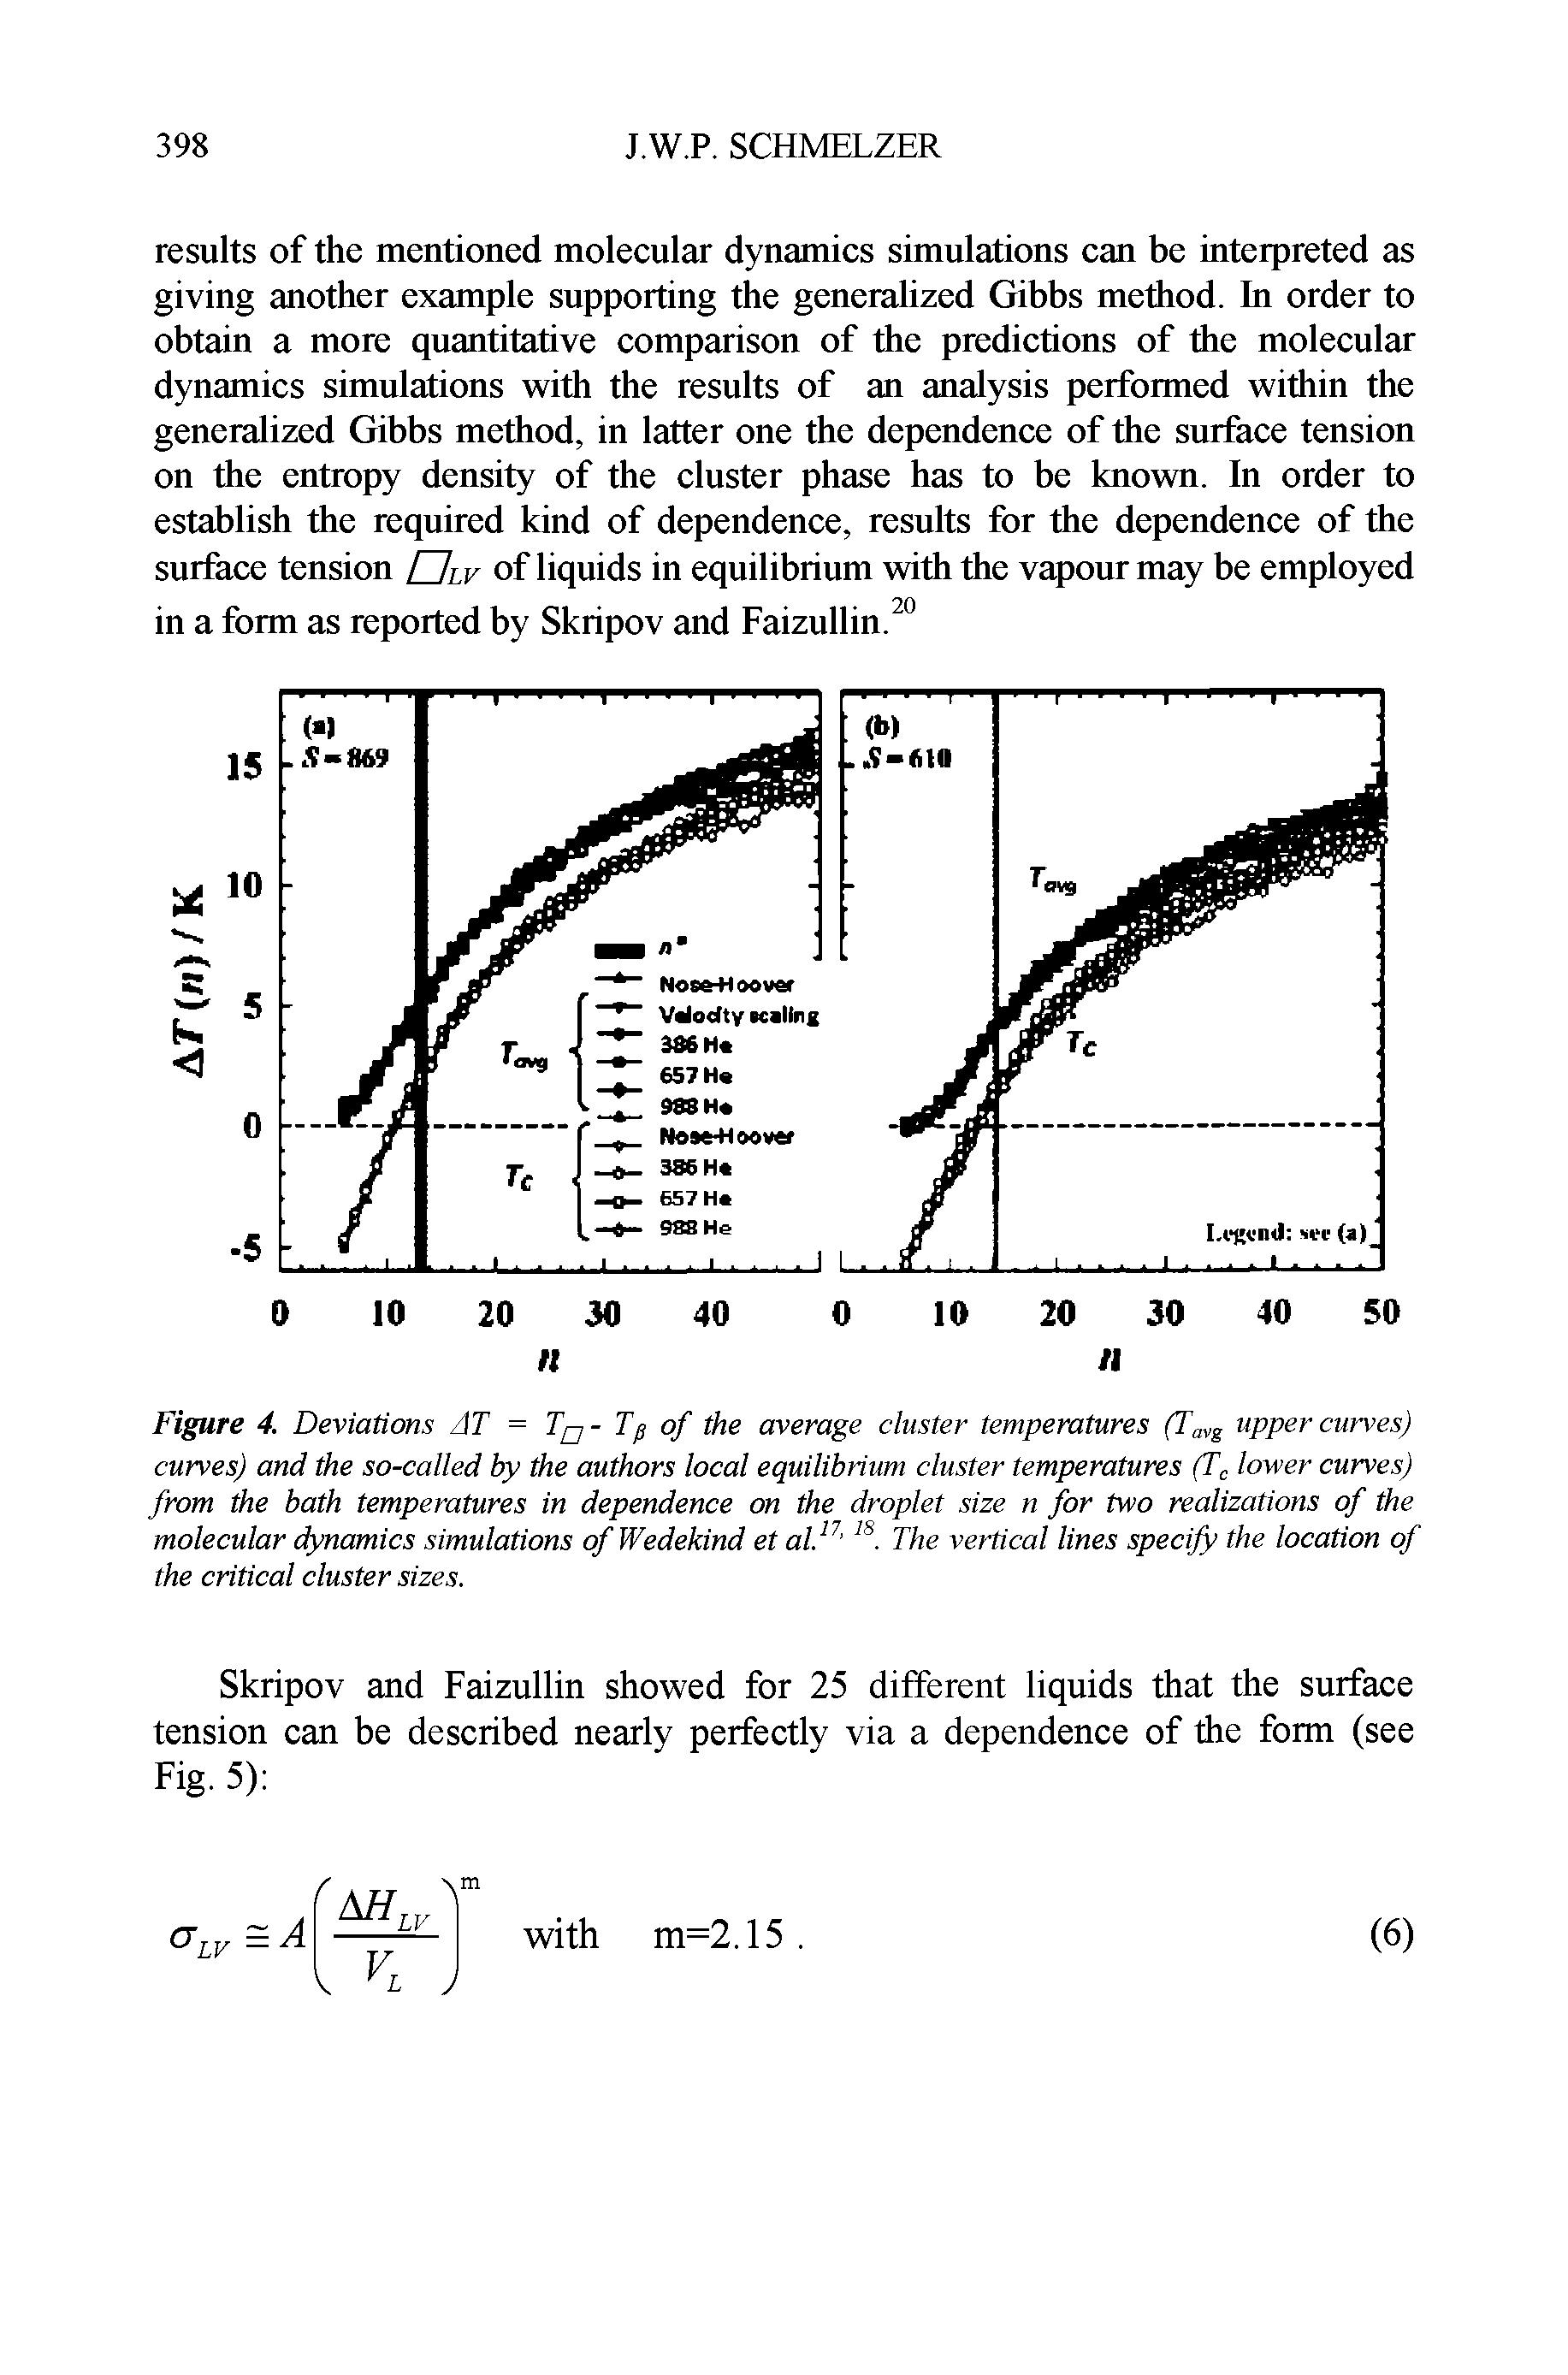 Figure 4. Deviations AT = Tn-Tp of the average cluster temperatures (Tavg upper curves) curves) and the so-called by the authors local equilibrium cluster temperatures (Tc lower curves) from the bath temperatures in dependence on the droplet size n for two realizations of the molecular dynamics simulations of Wedekind et aV The vertical lines specify the location of the critical cluster sizes.